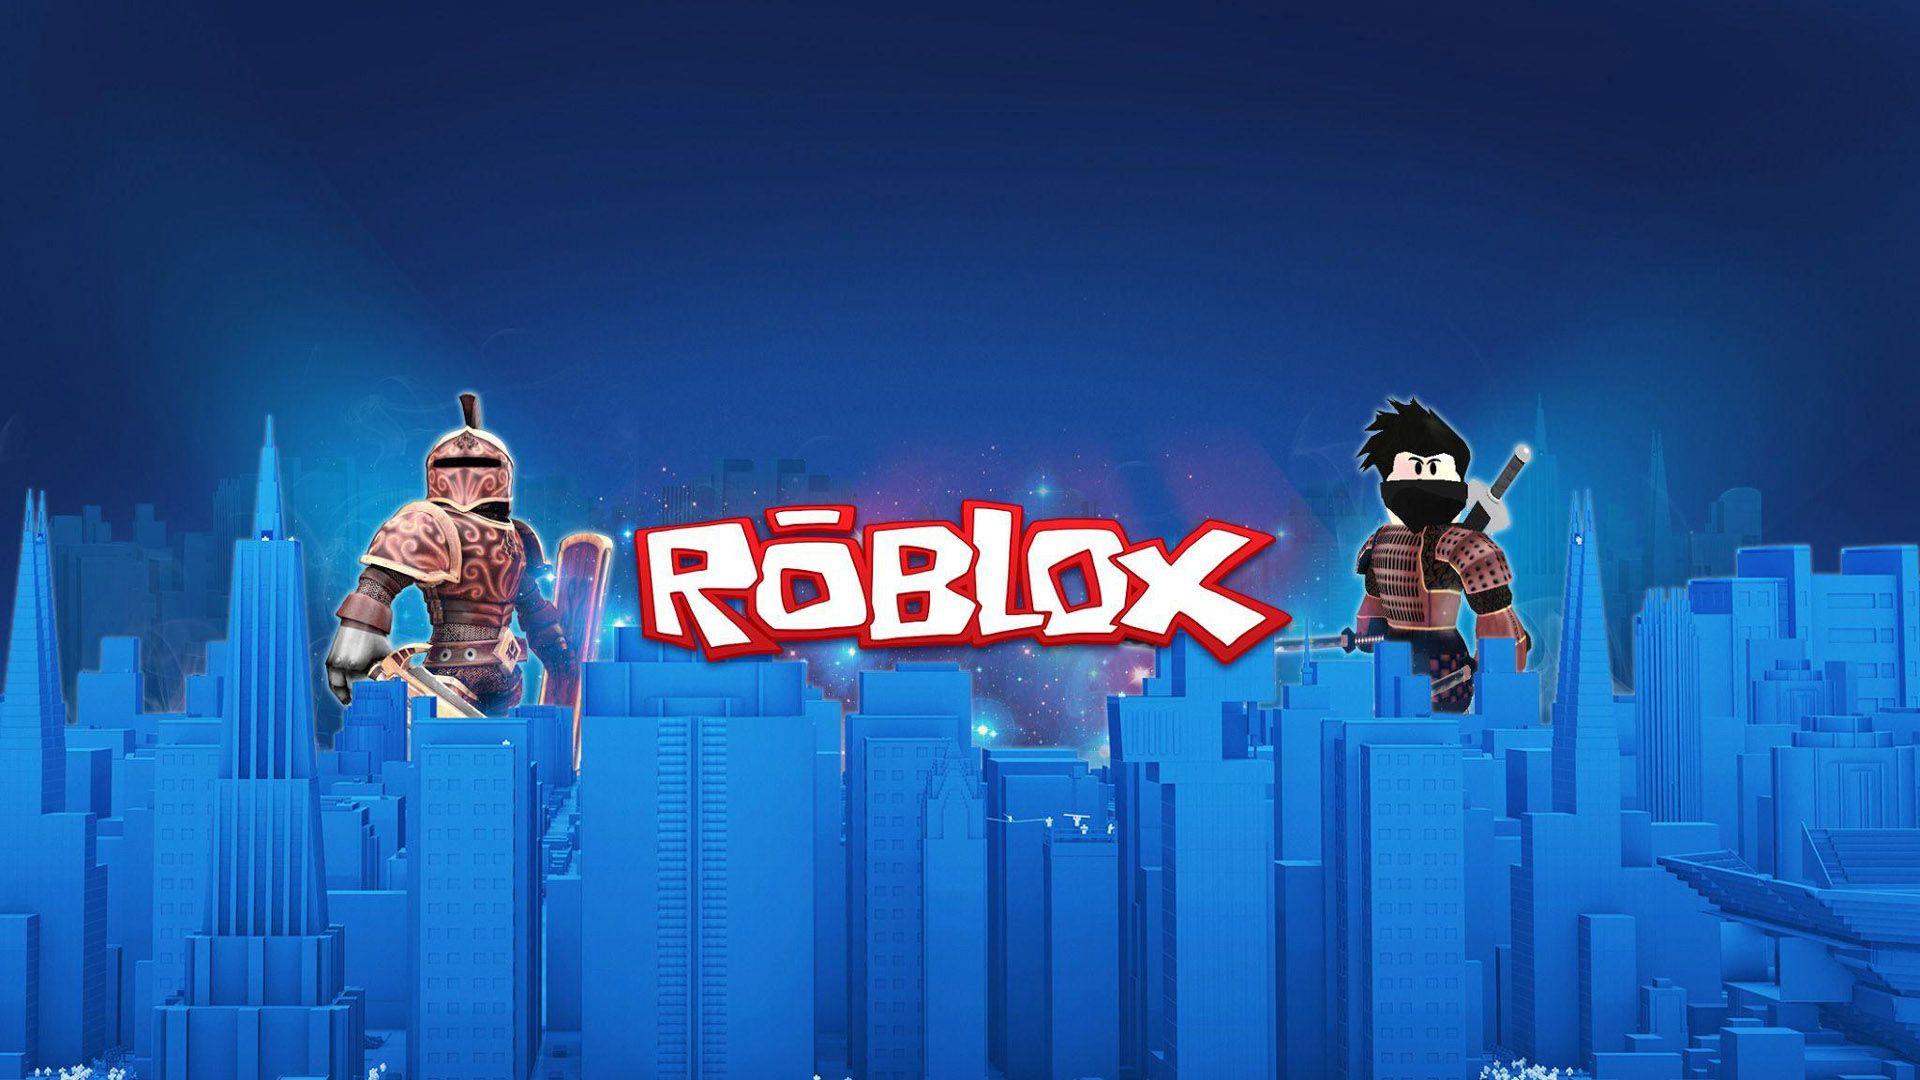 Roblox Blue Wallpapers Top Free Roblox Blue Backgrounds Wallpaperaccess - roblox blue